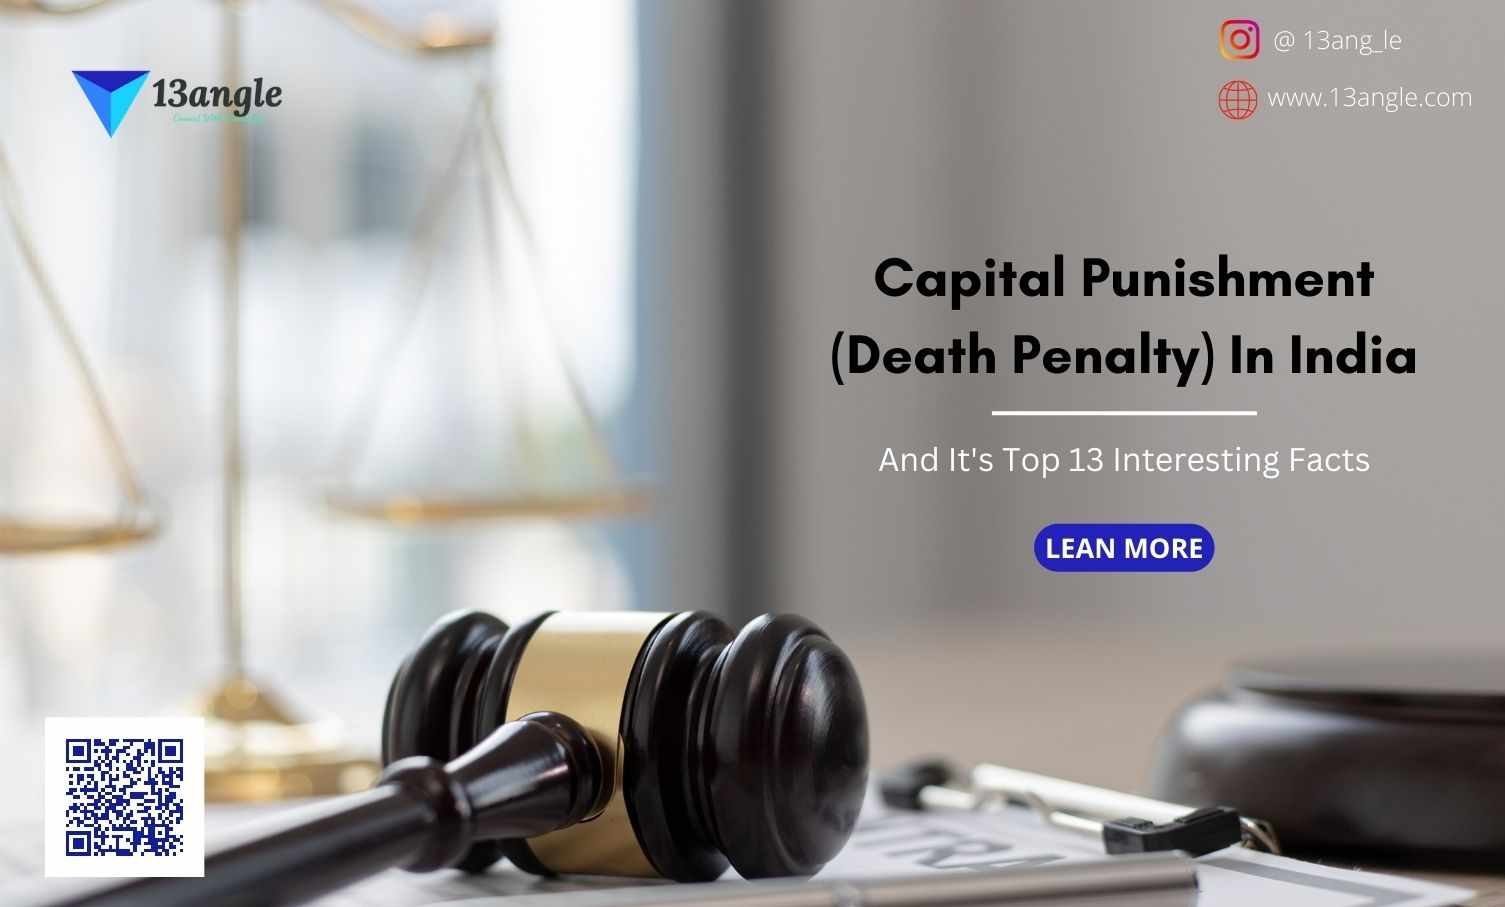 Capital Punishment (Death Penalty) In India- 13angle.com